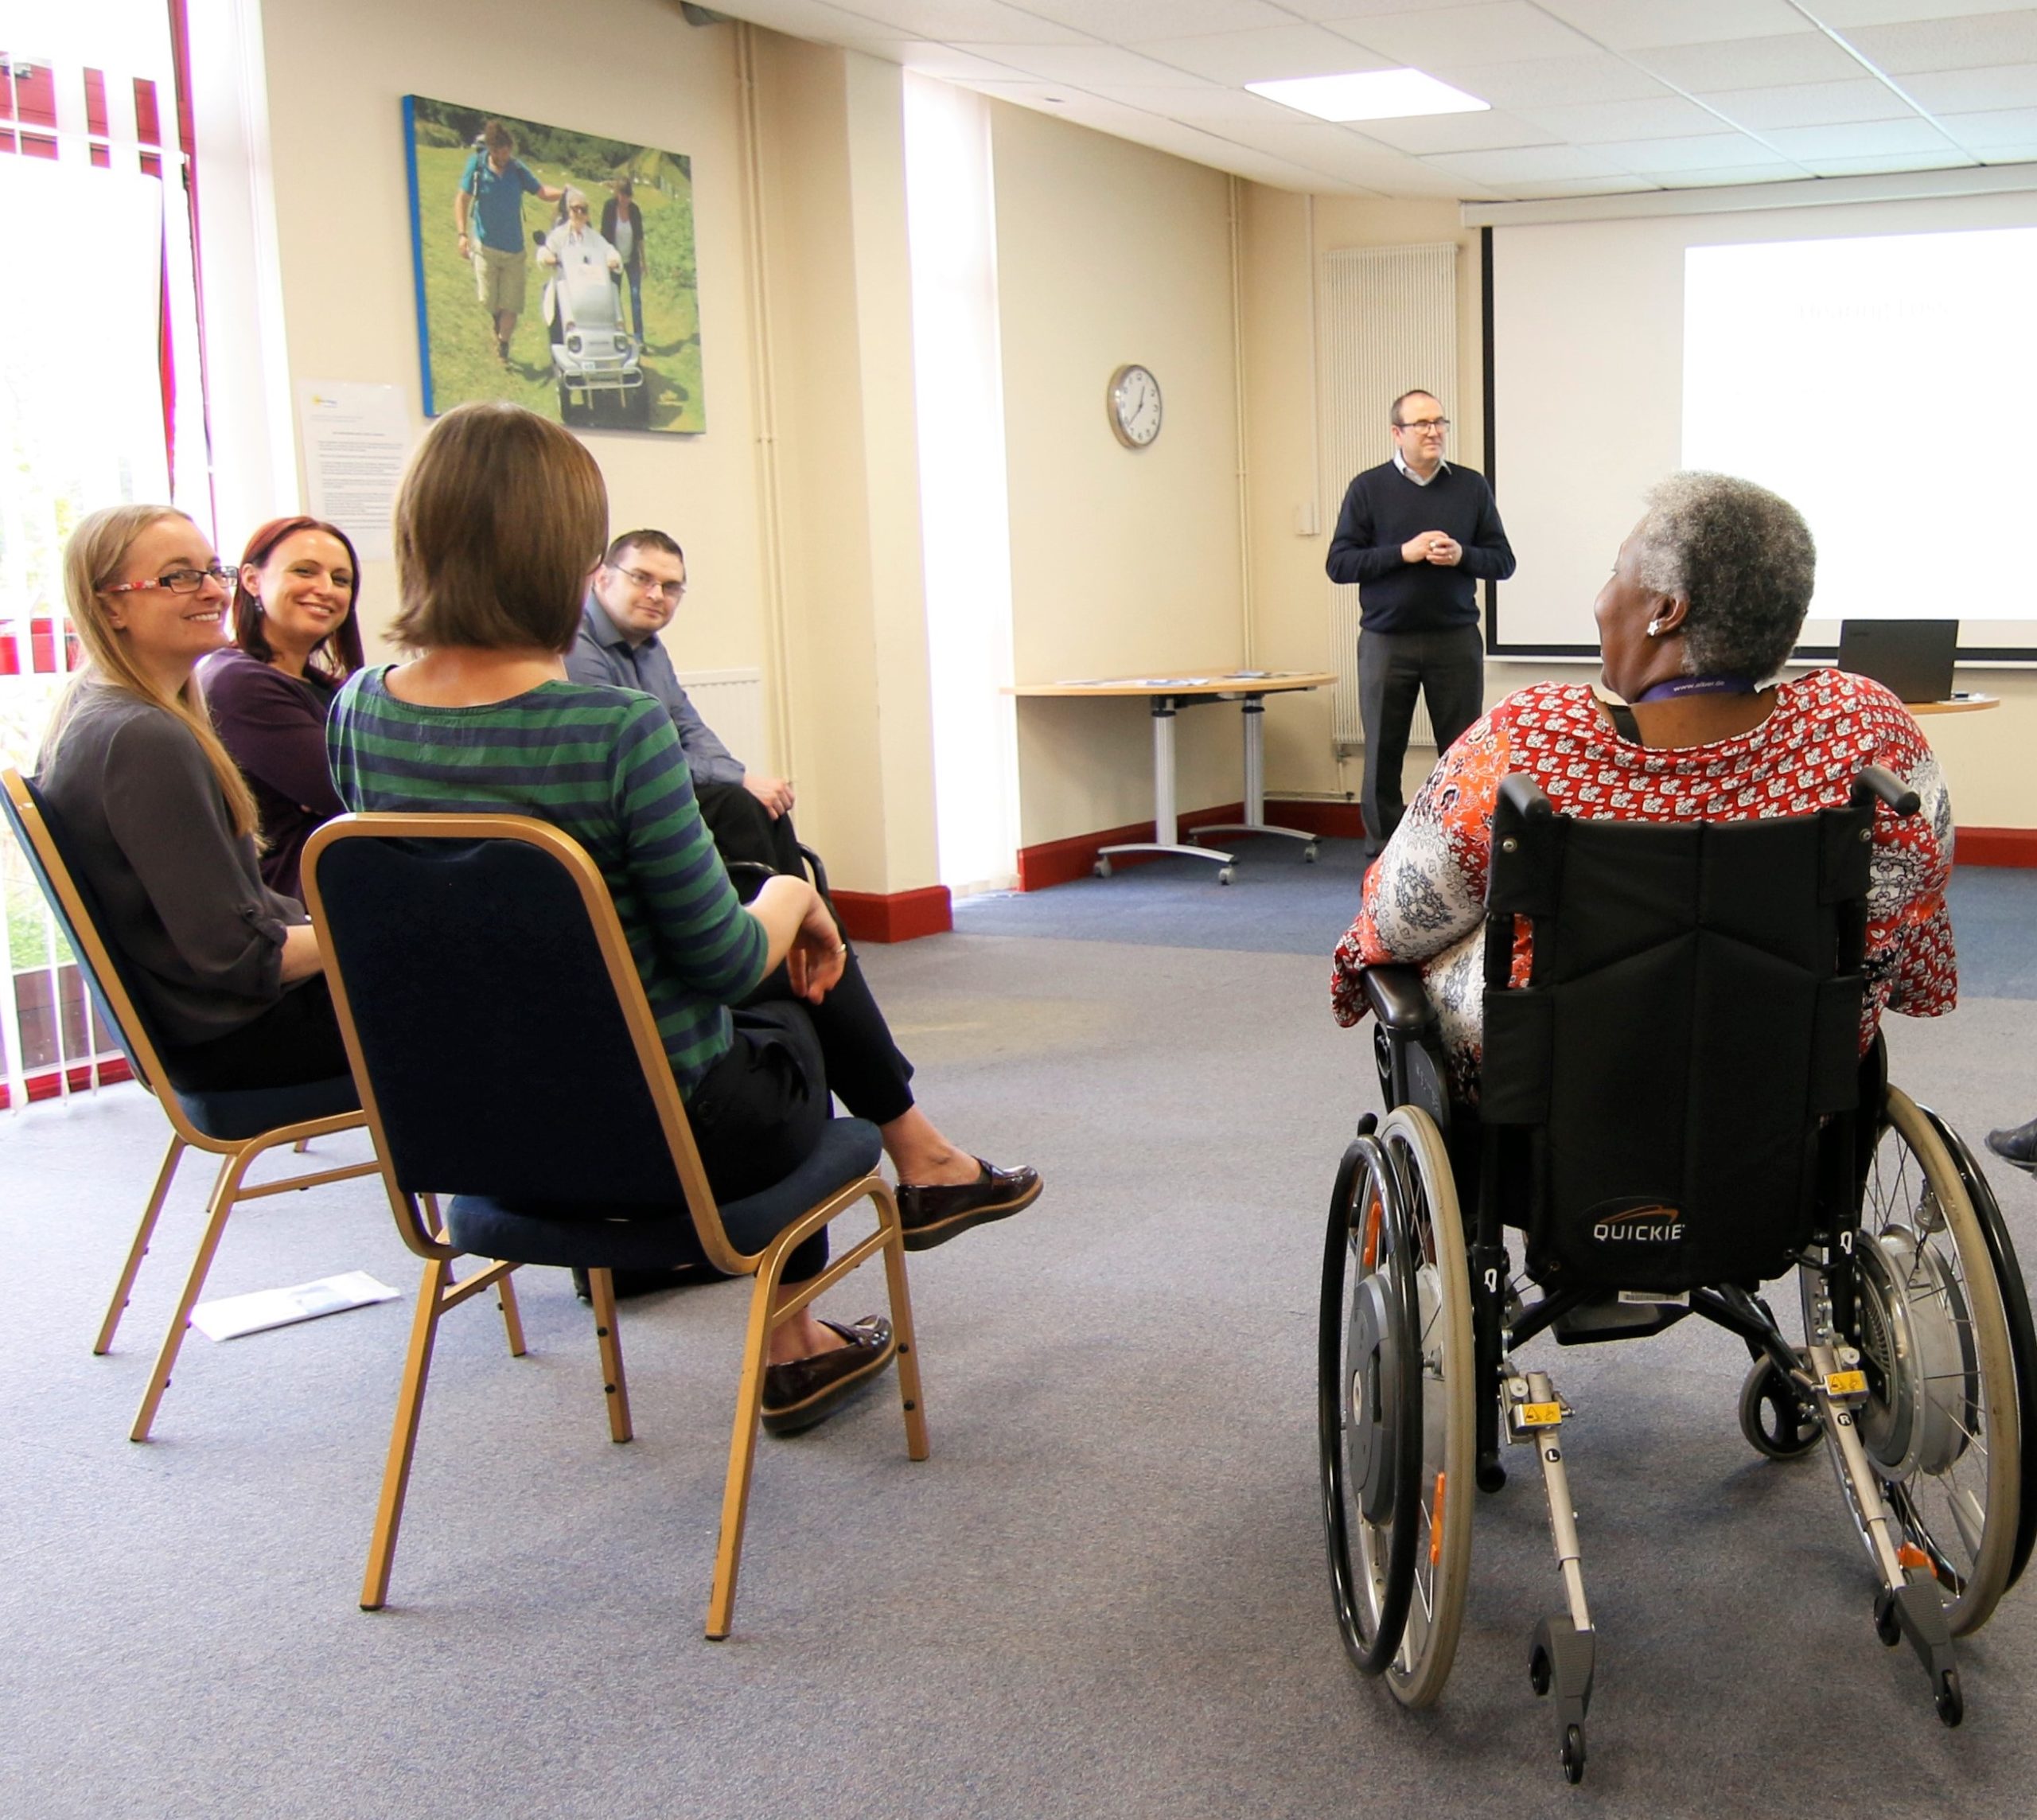 a group of people in the LOD office during a training or workshop session. The people are chatting and smiling, one of the females is a wheelchair user.